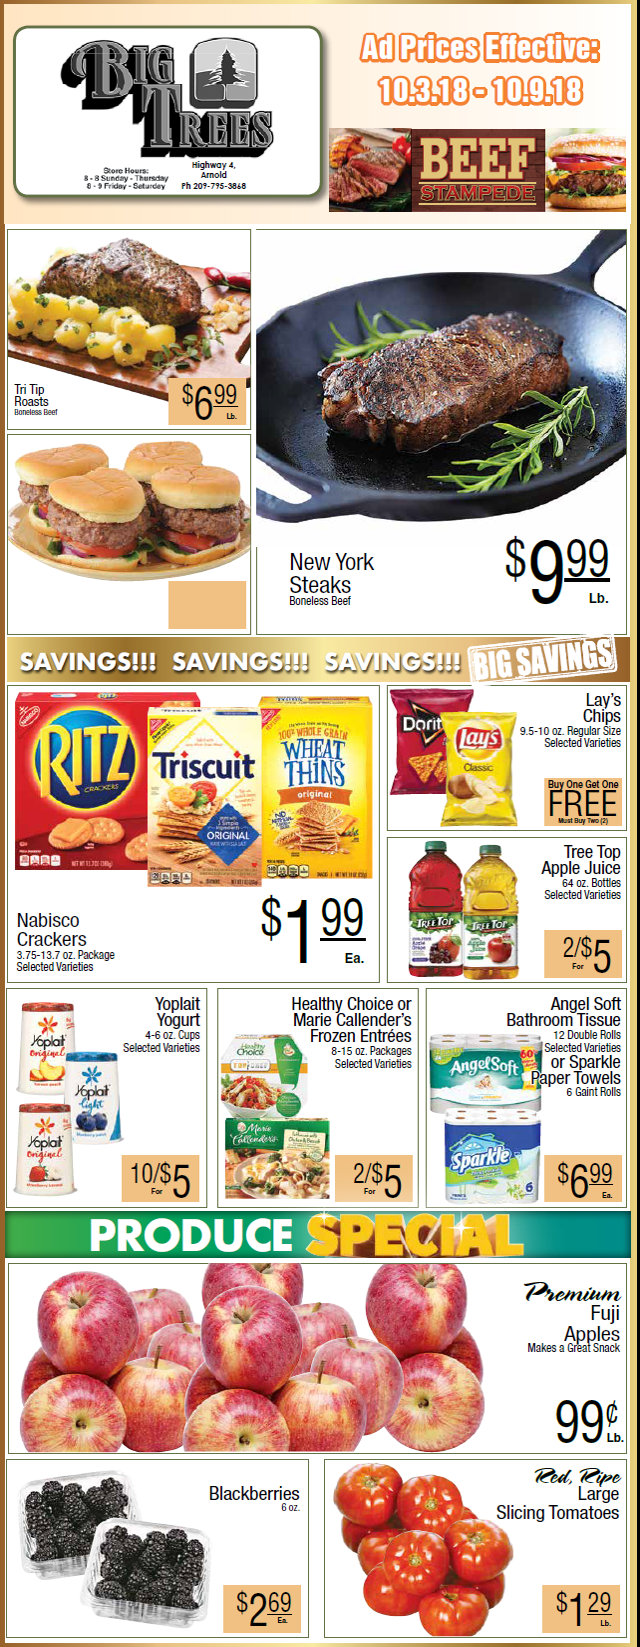 Big Trees Market Weekly Ad & Grocery Specials Through October 9th